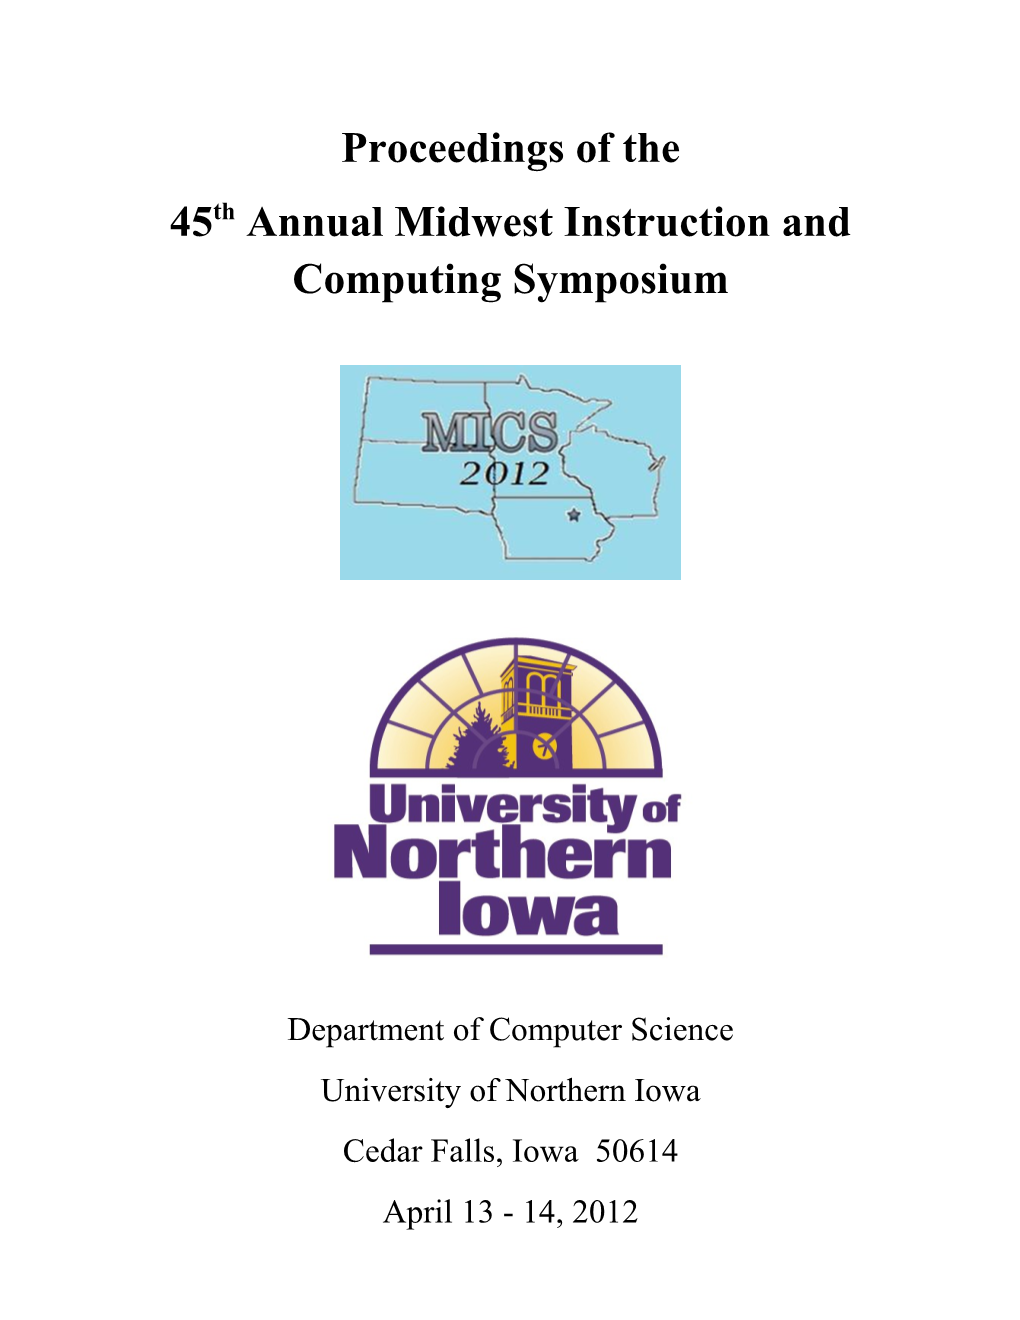 45Th Annual Midwest Instruction and Computing Symposium